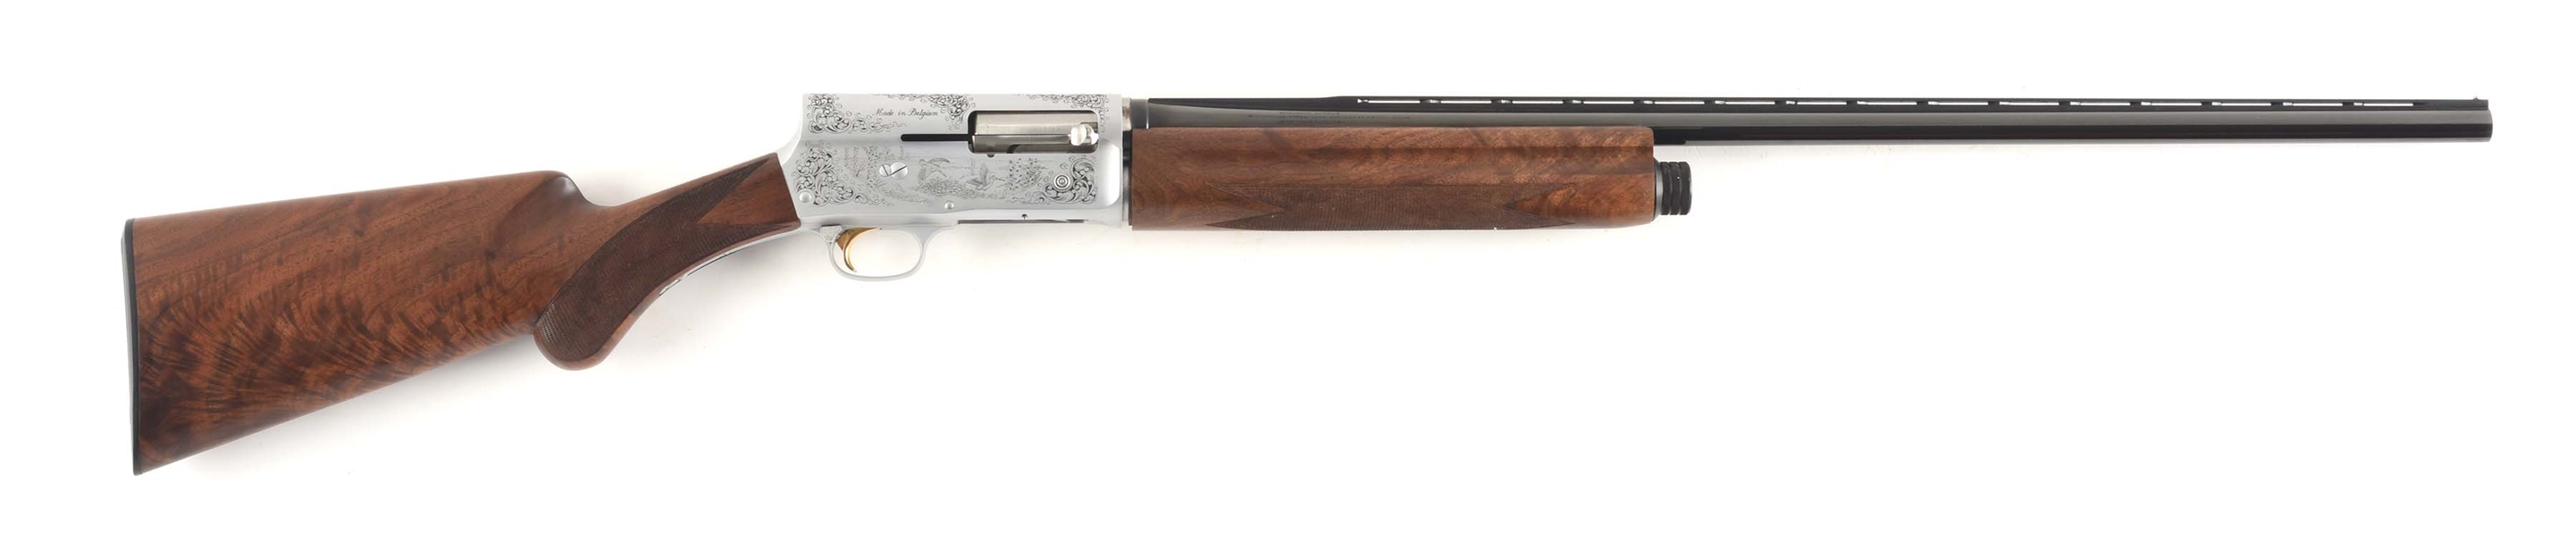 (M) ENGRAVED BROWNING A5 B4 GRADE SEMI AUTOMATIC SHOTGUN WITH CASE.